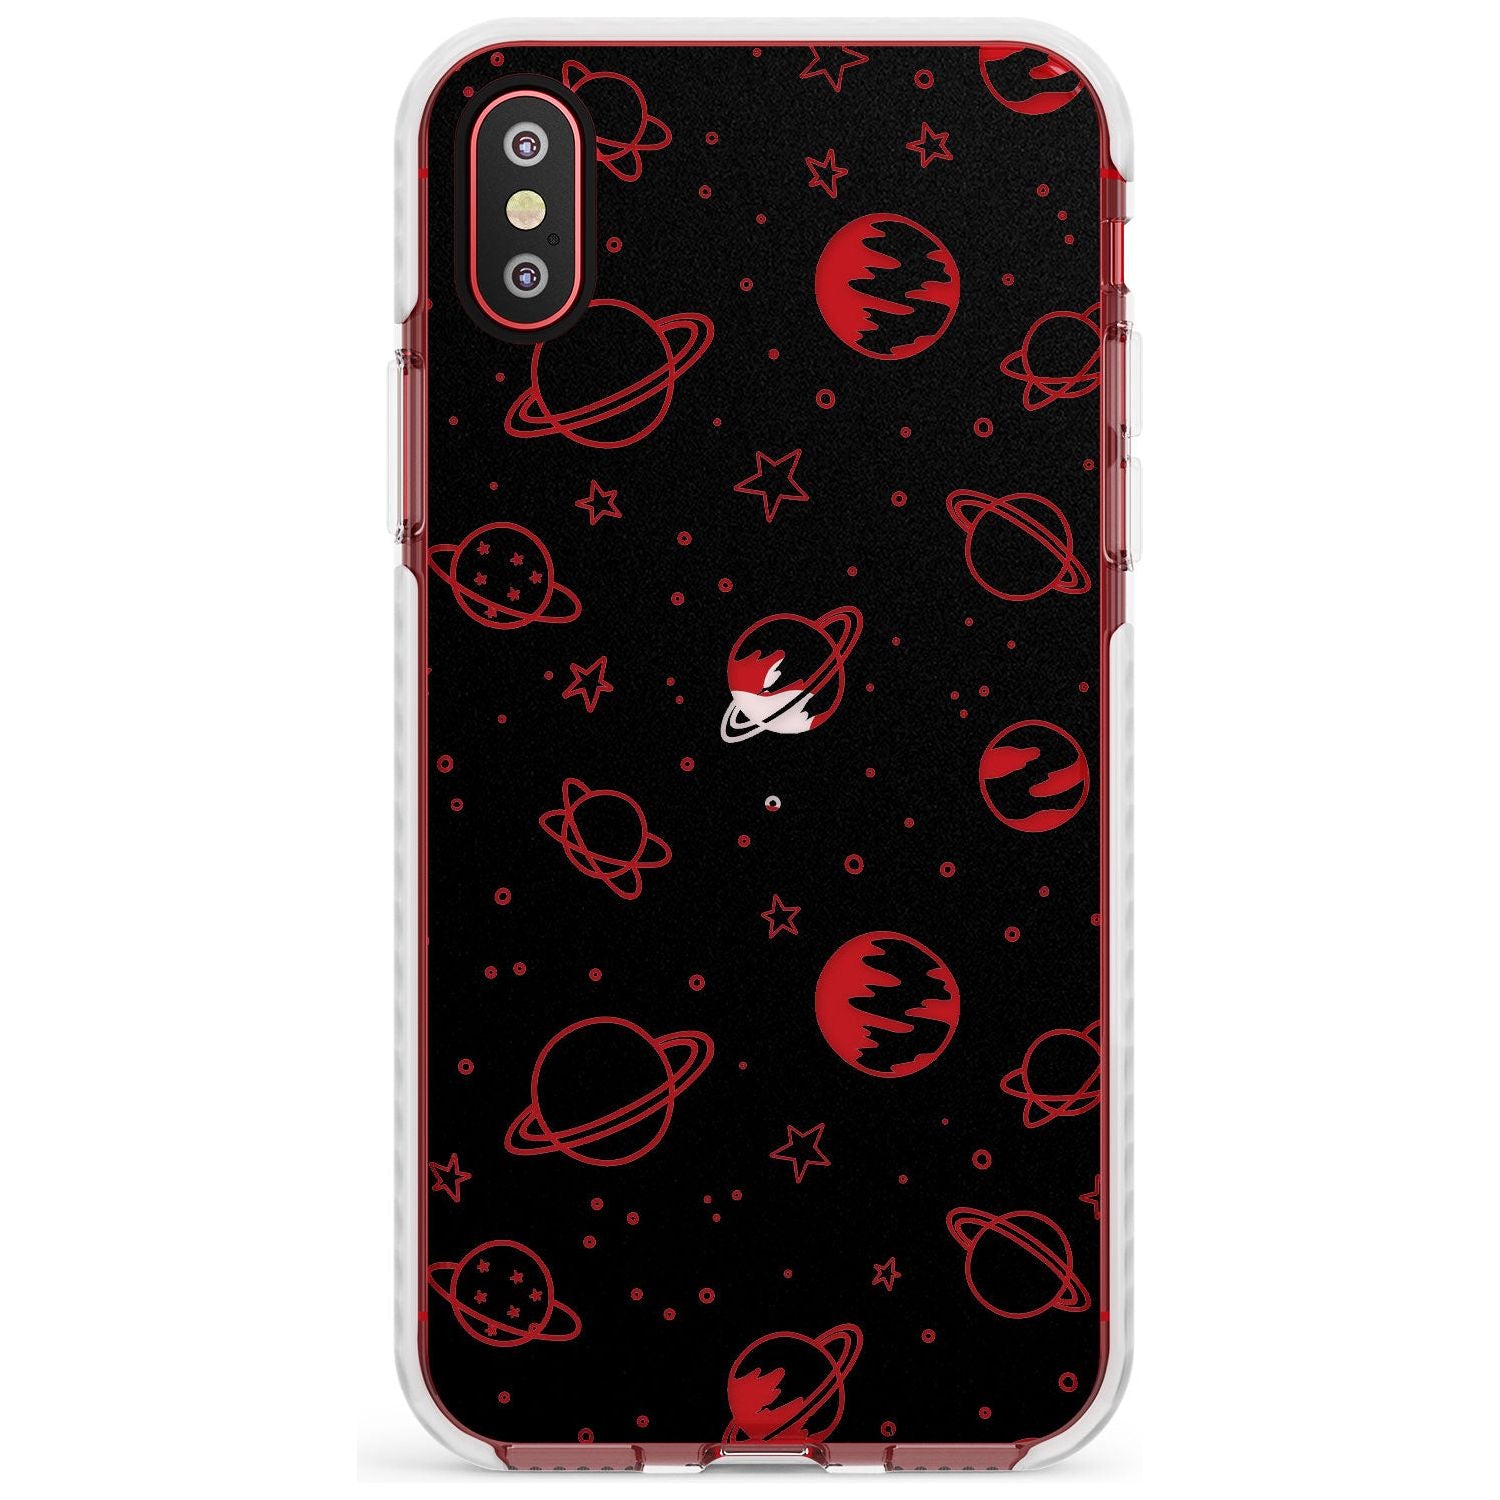 Outer Space Outlines: Clear on Black Slim TPU Phone Case Warehouse X XS Max XR